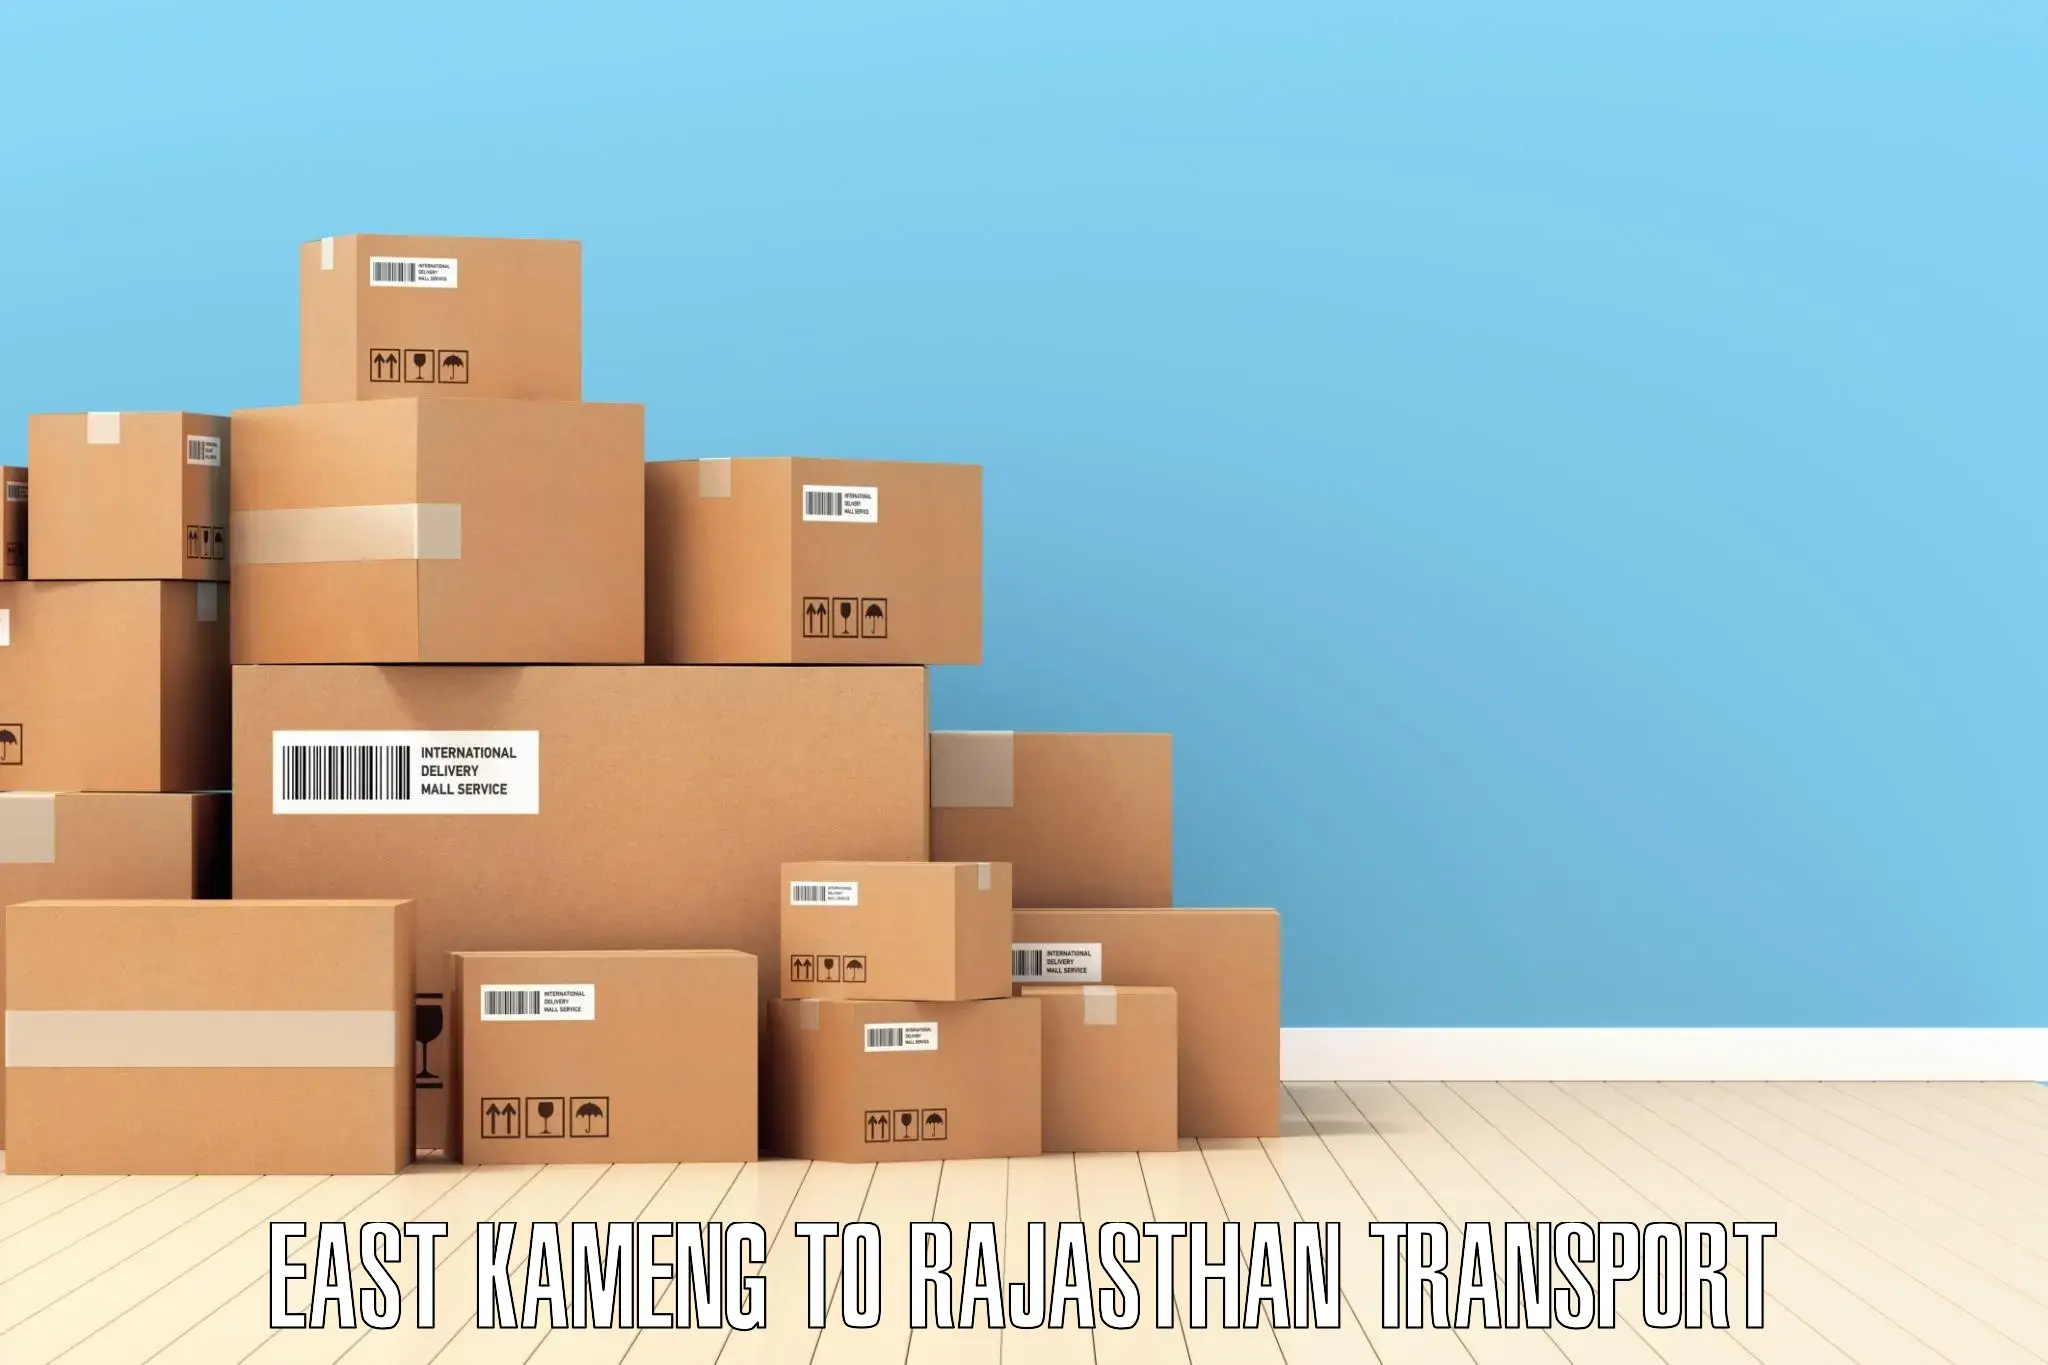 Daily parcel service transport East Kameng to Rawatbhata